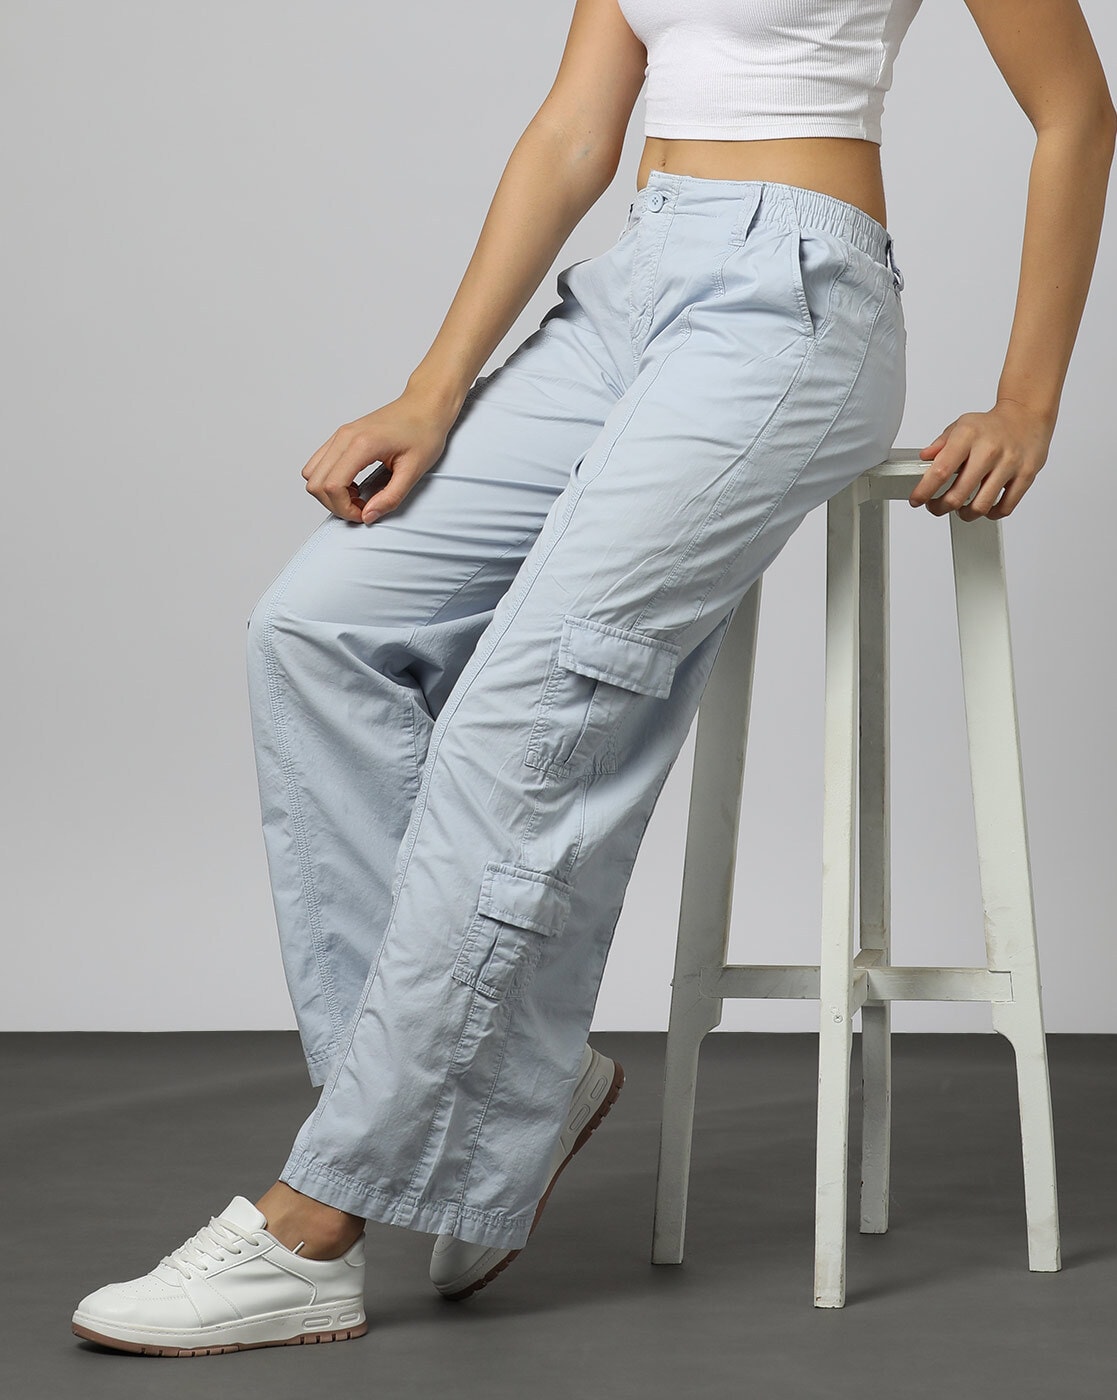 EDCRF High Waisted Cargo Pants Women Relaxed Fit Athletic India